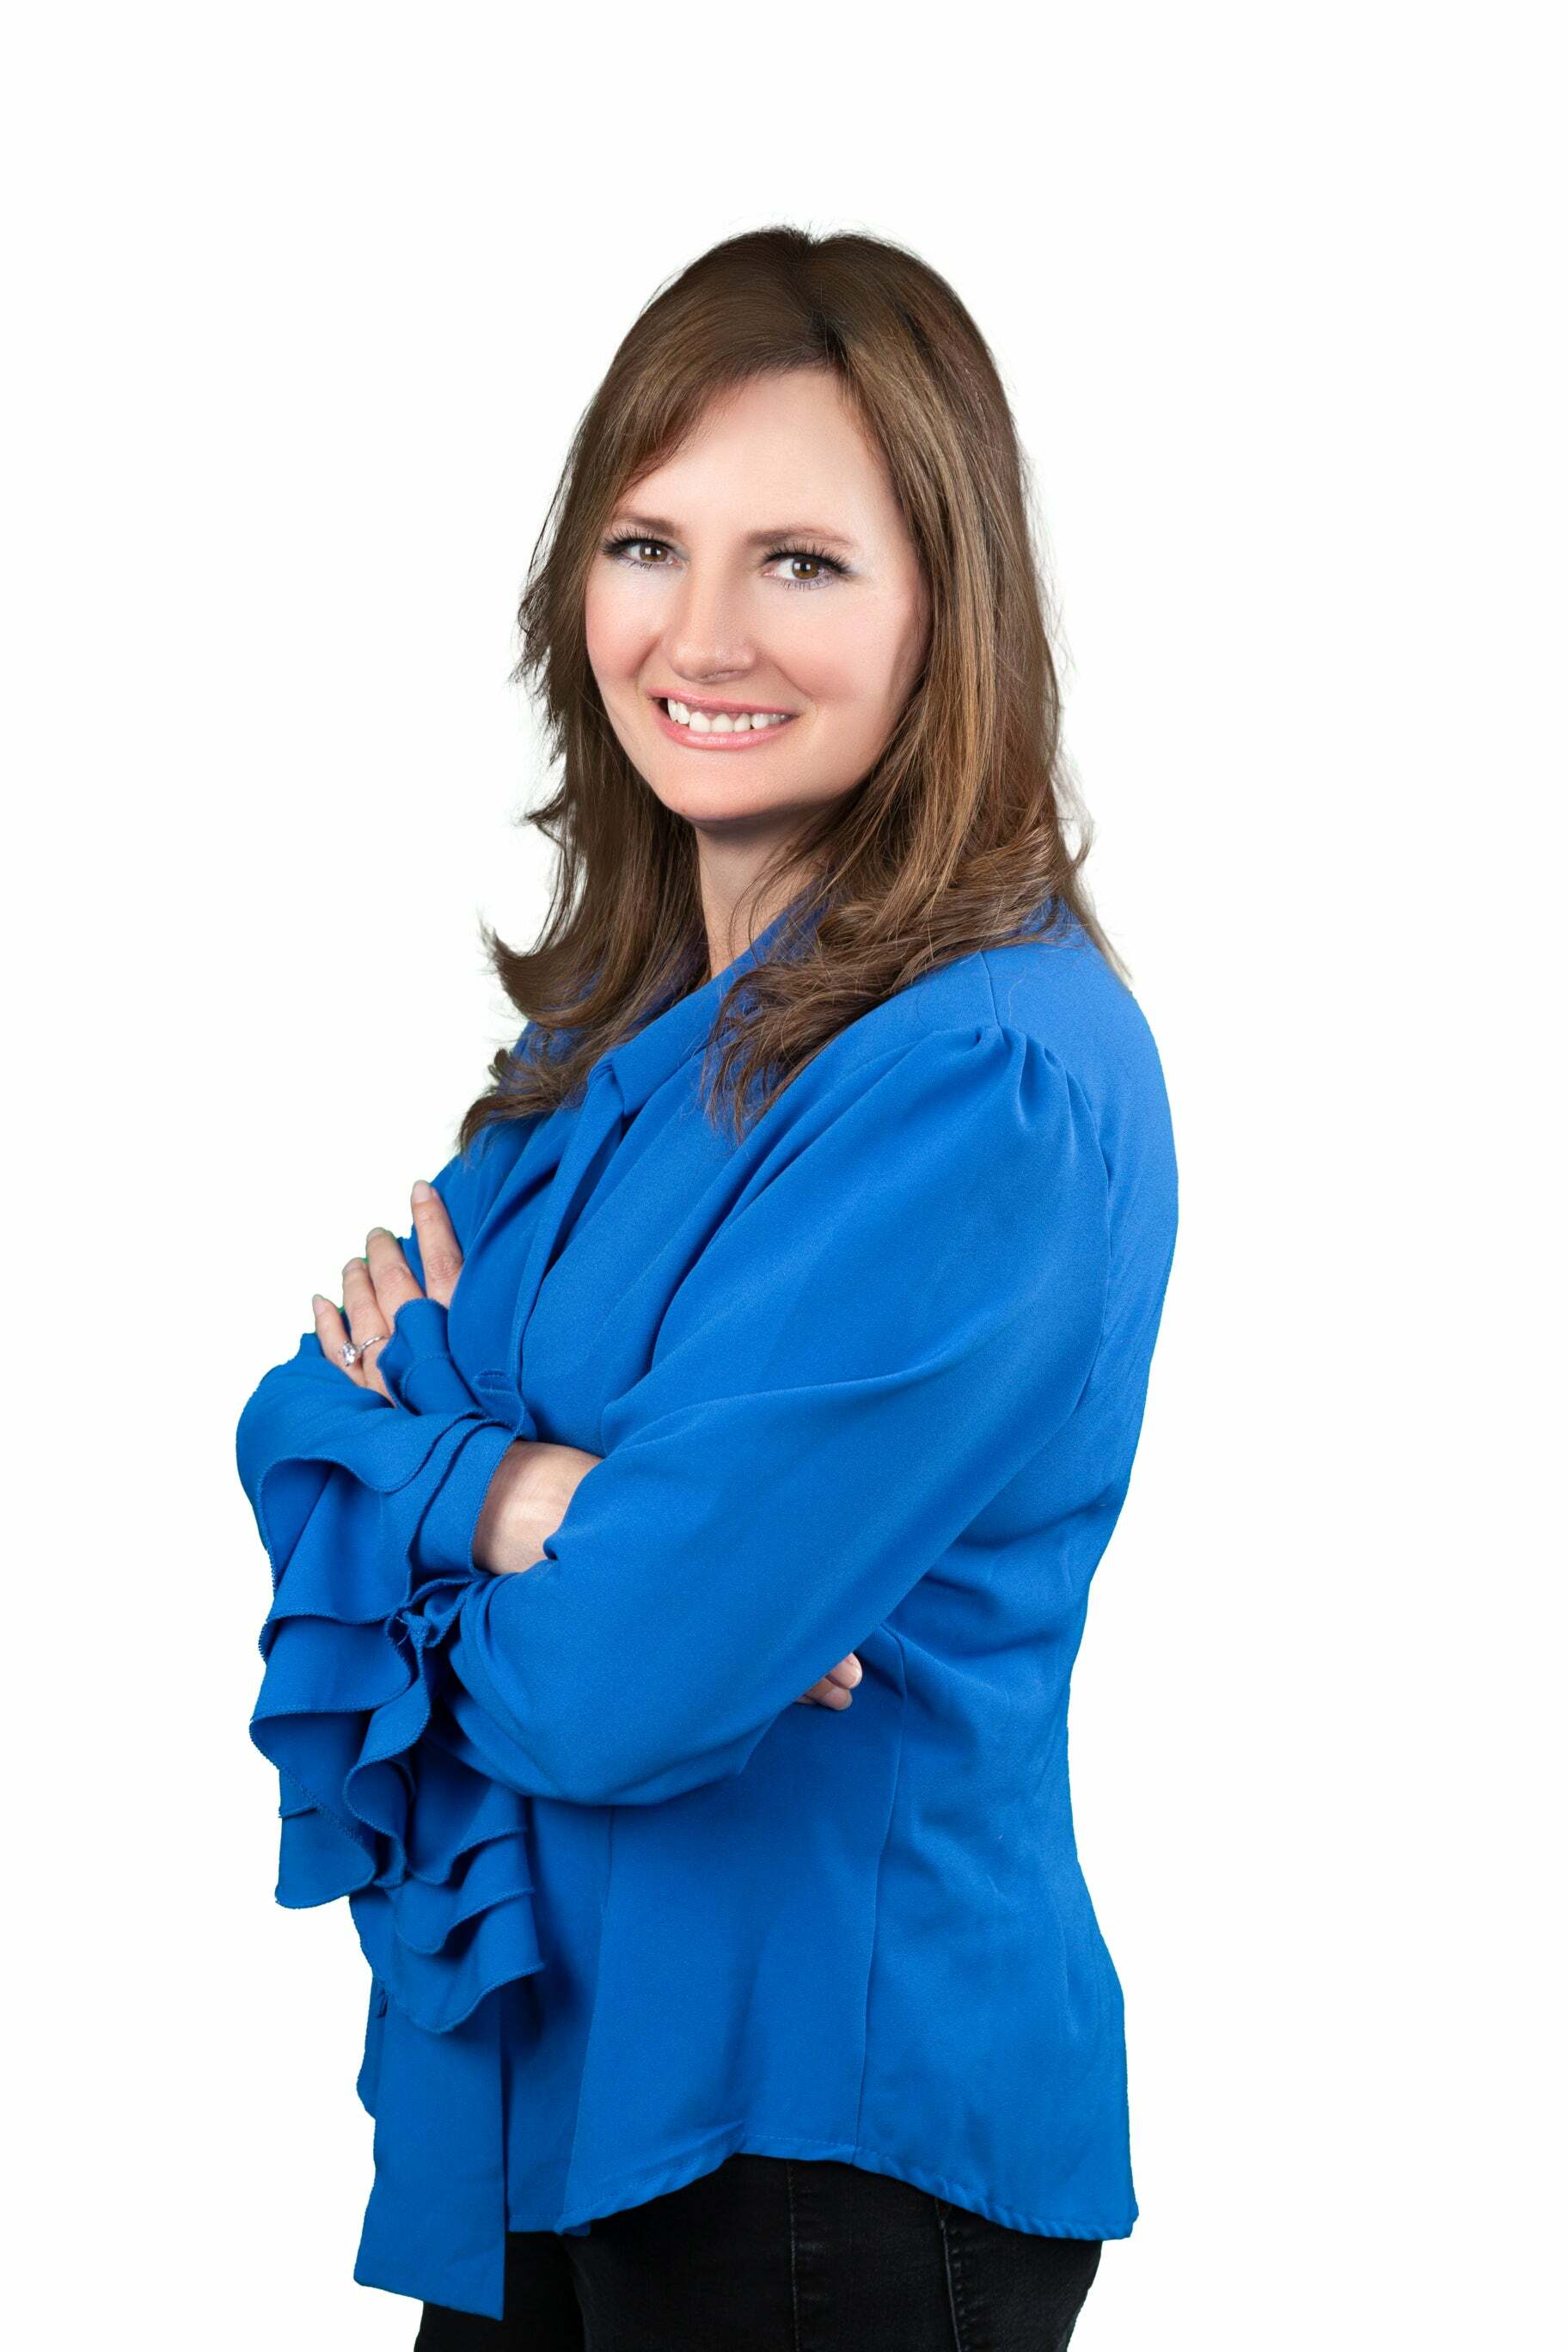 Wendy Gault, Real Estate Salesperson in Canyon Lake, Associated Brokers Realty